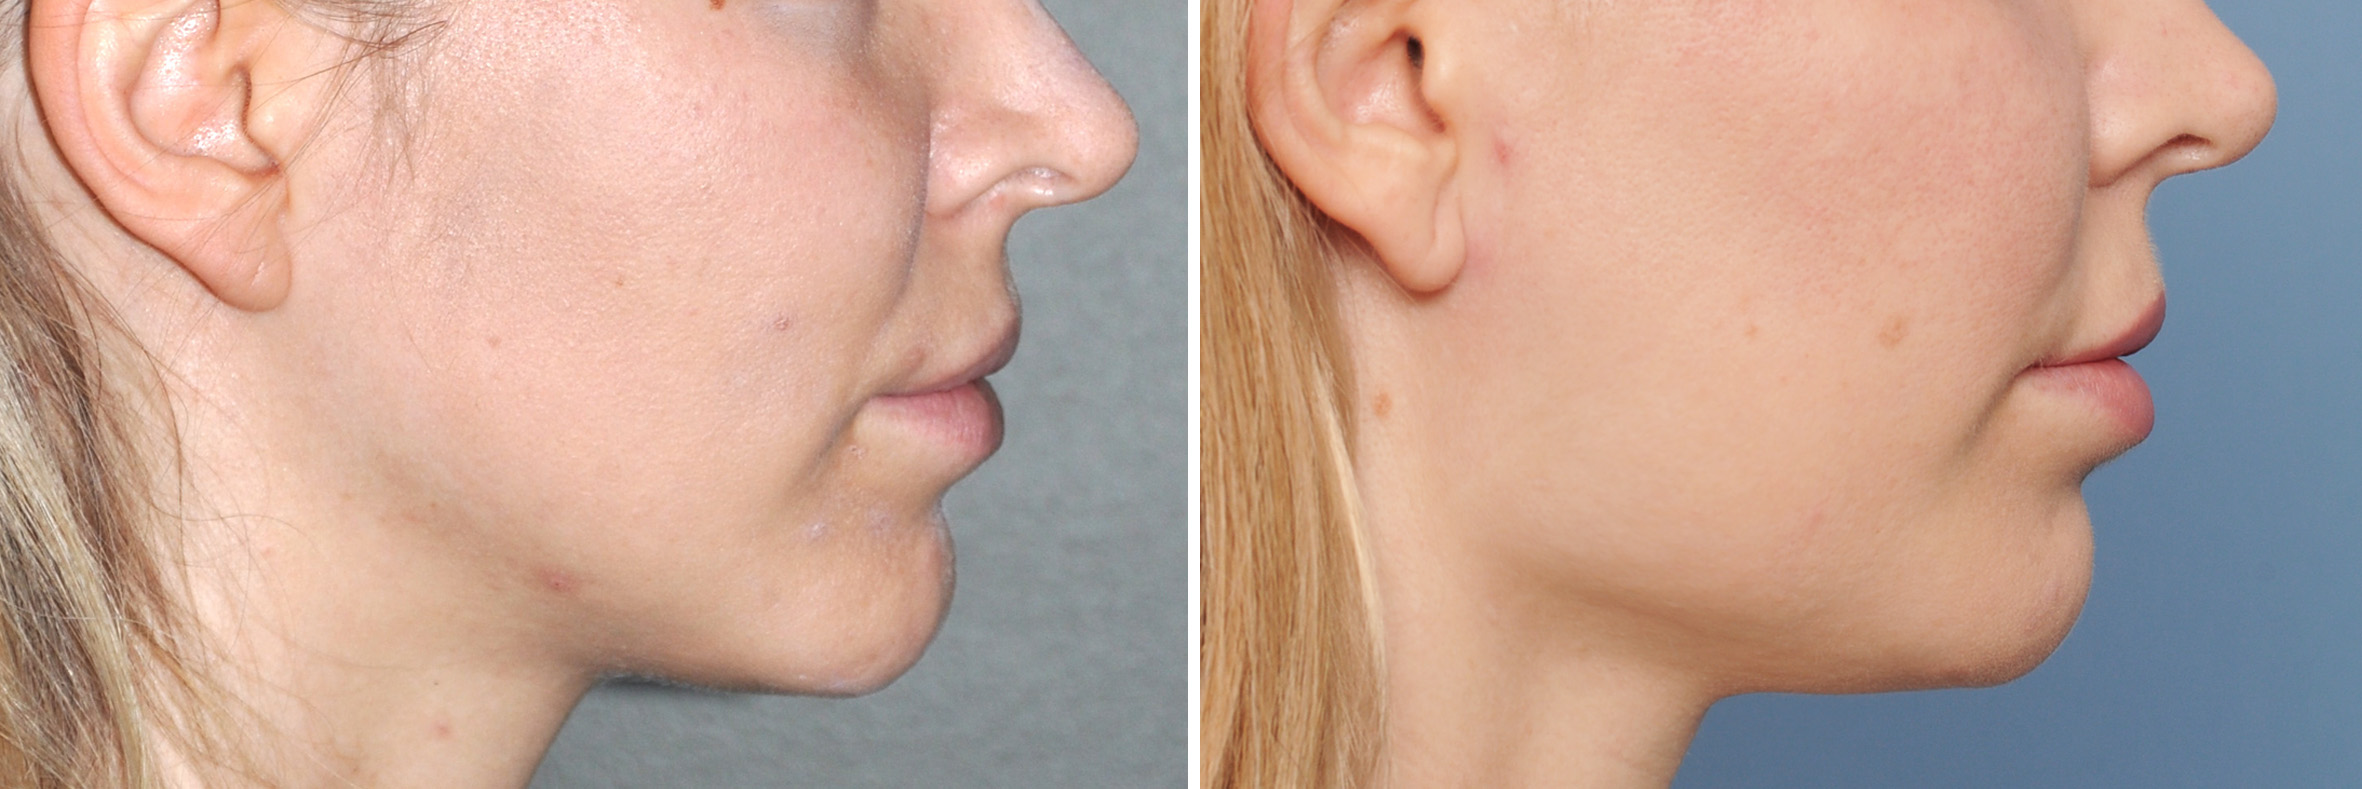 Jaw angle implants historically were one style that only widened the jaw an...